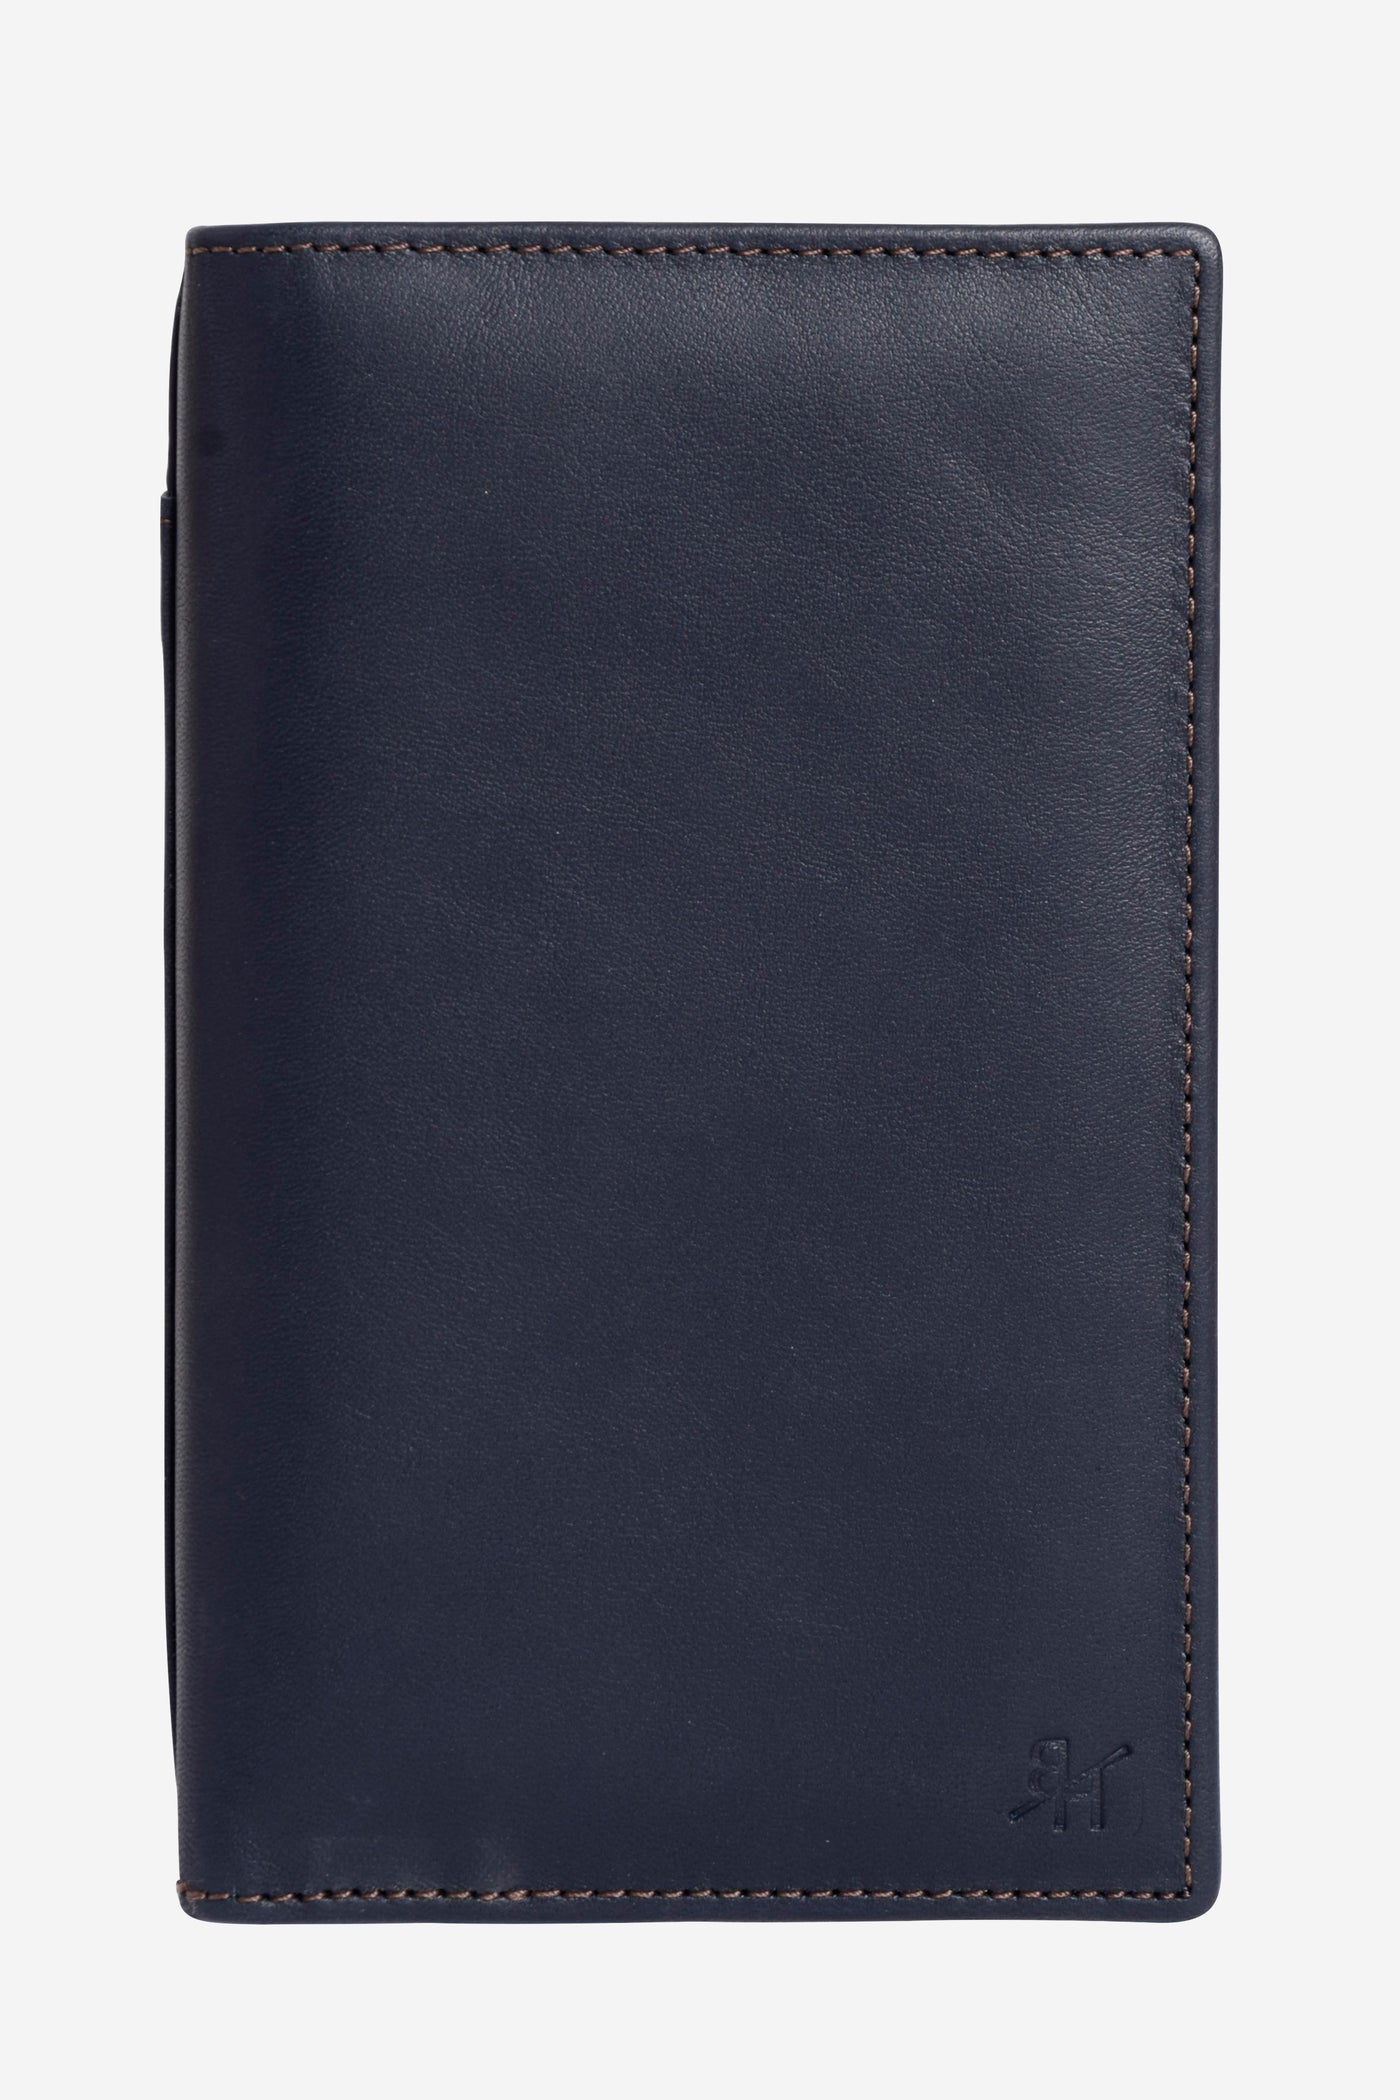 WAL008 / Midnight Blue Leather Wallet